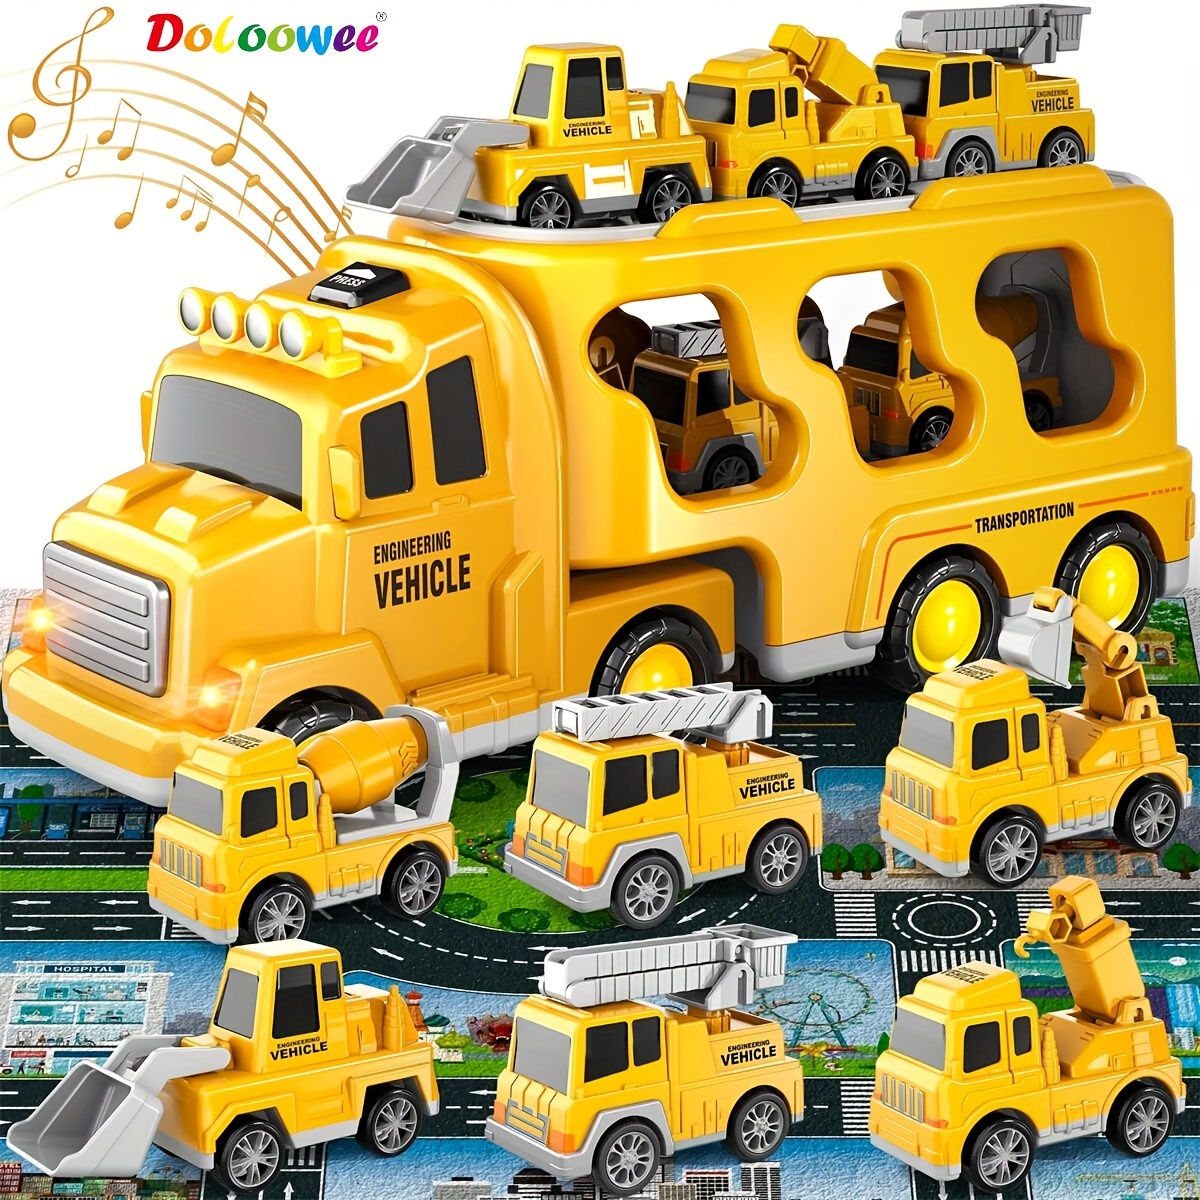 

Doloowee Toddler Construction Truck Toys 7 In 1 With Map, Construction Transportation Truck Friction Vehicle, Excavator, Bulldozer, Crane And Mixer For Boys 3-7 Years Christmas Birthday Gift